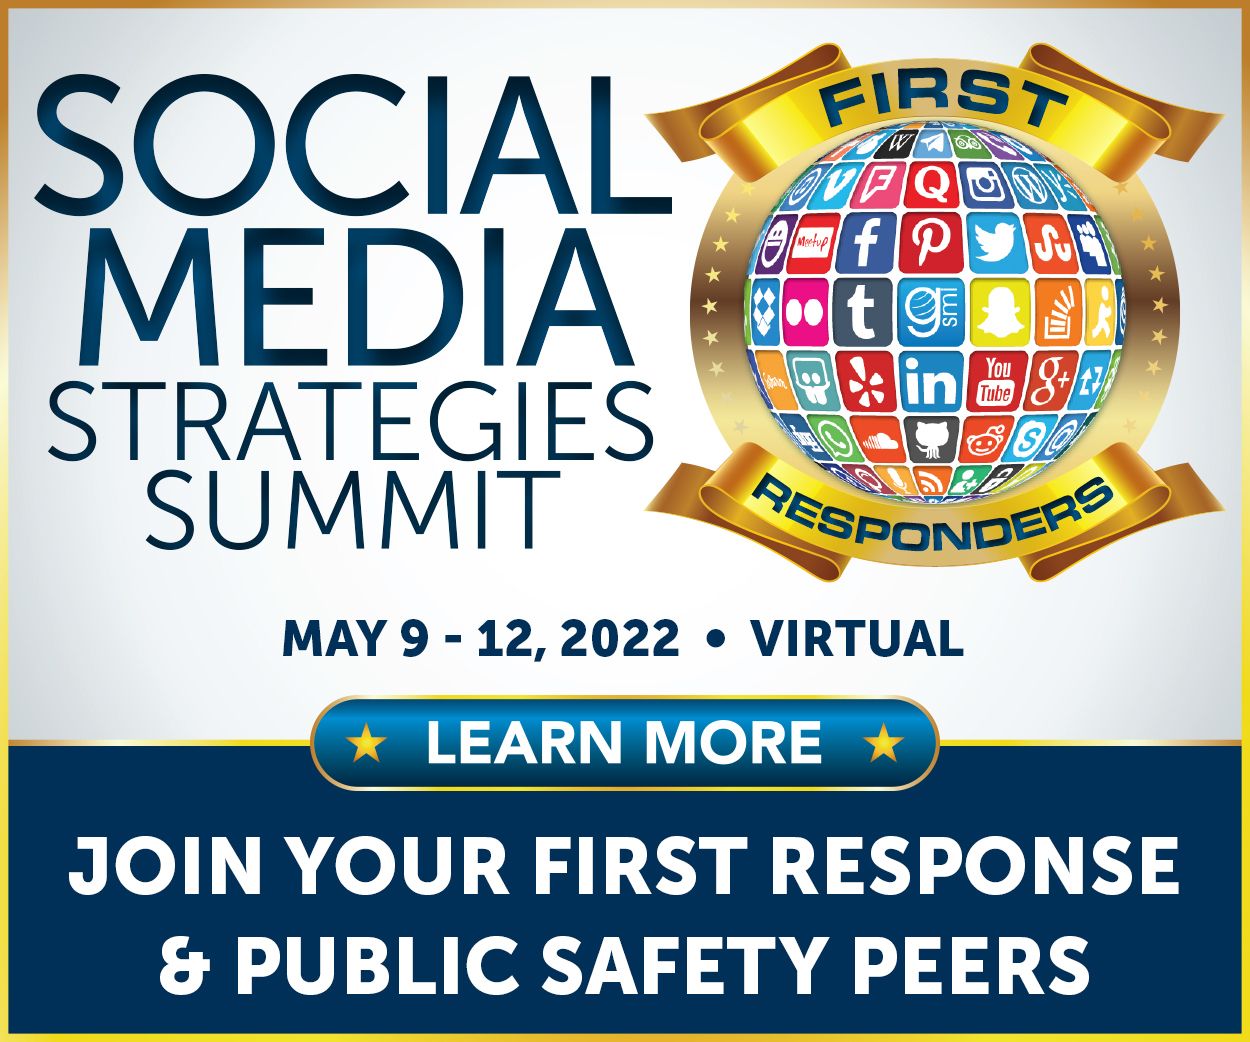 Social Media Strategies Summit - First Responders | Virtual Conference, Online Event